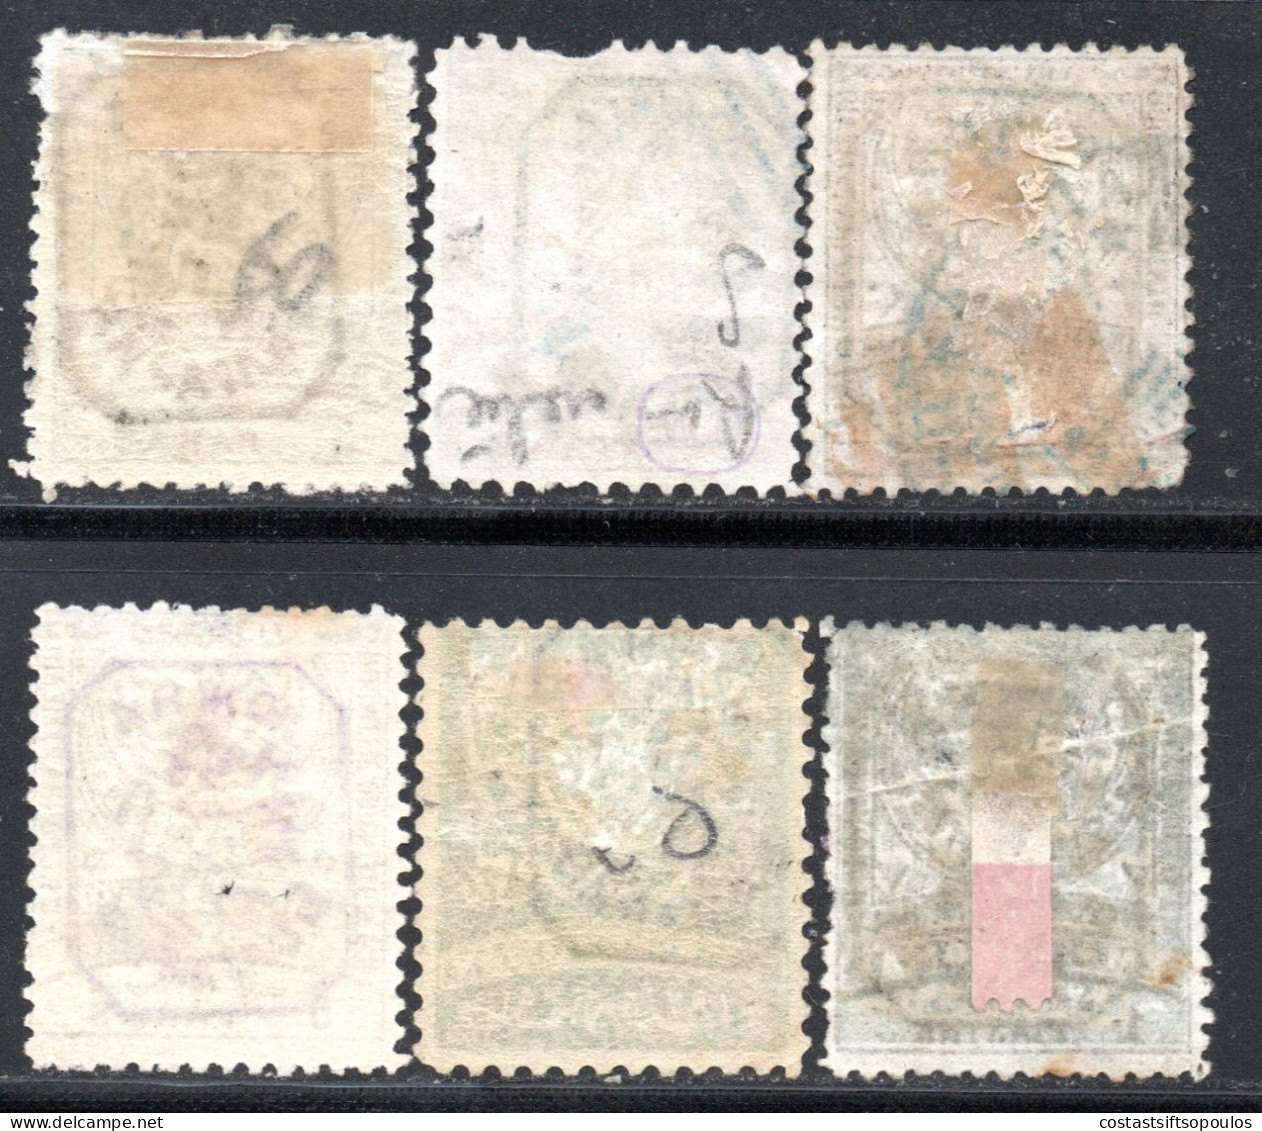 2085. SOUTH BULGARIA,THRACE, EASTERN RUMELIA 1885 6 STAMPS LOT - Ostrumelien